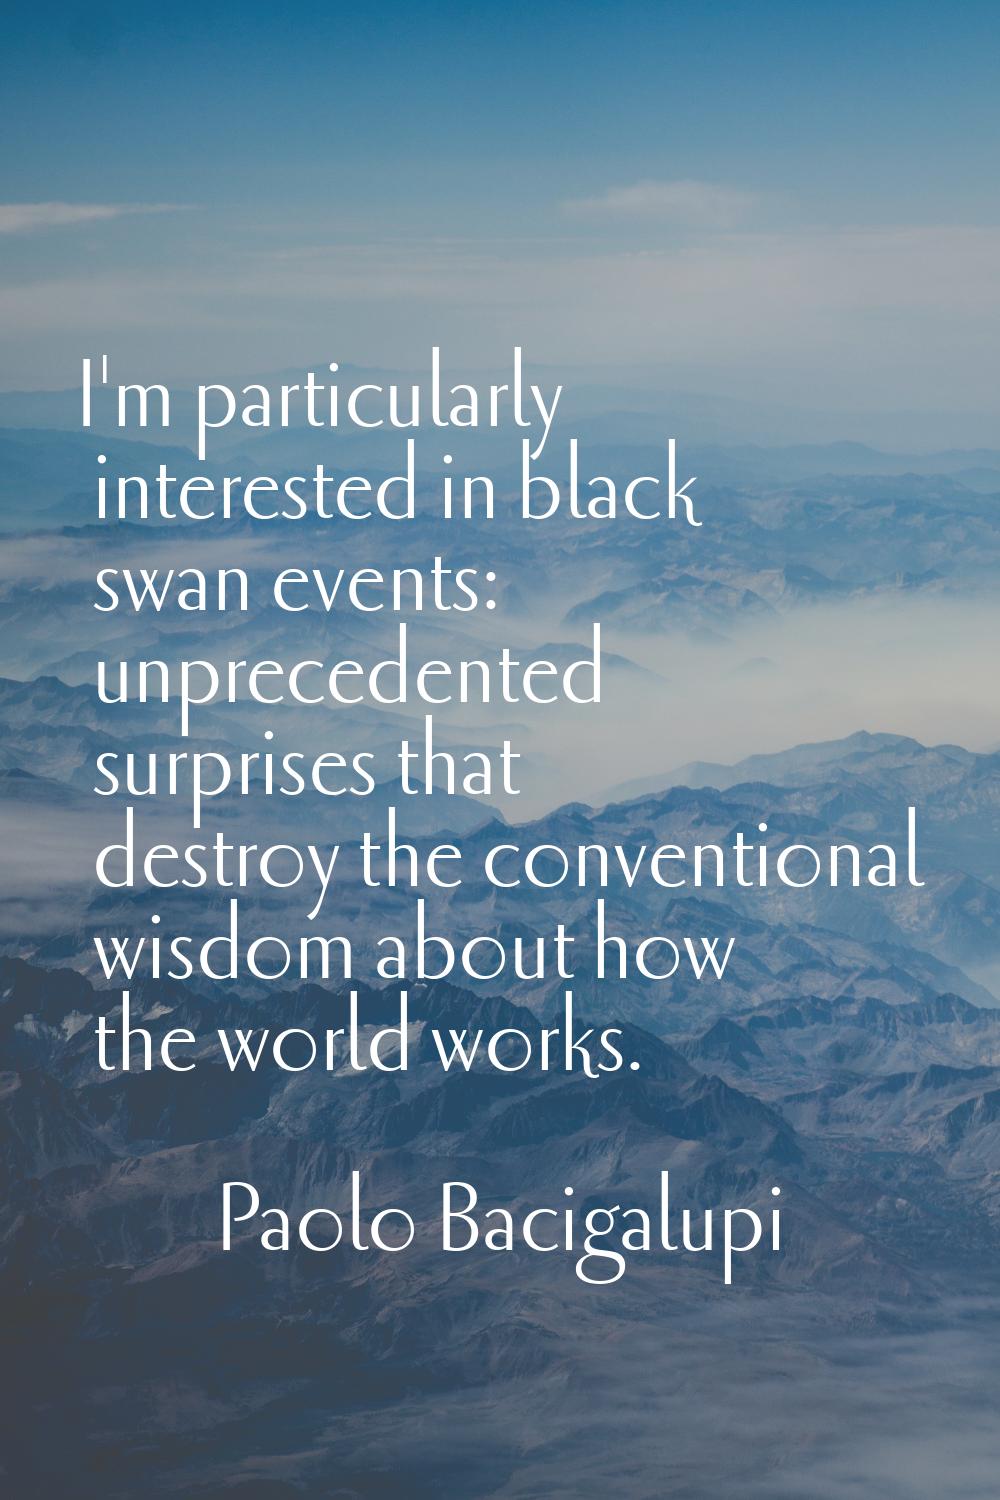 I'm particularly interested in black swan events: unprecedented surprises that destroy the conventi